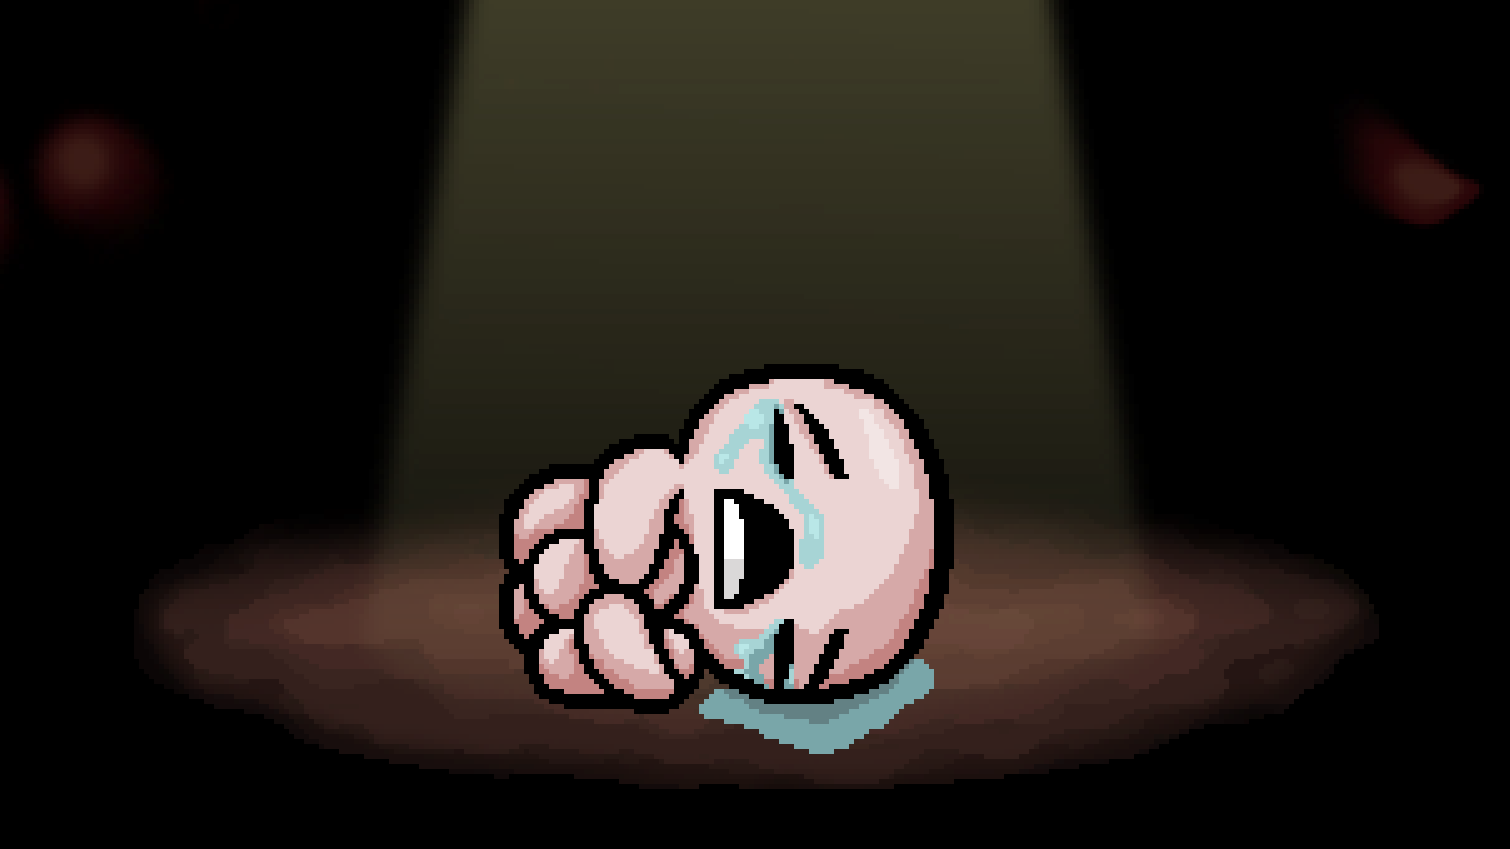 Isaac curled up crying on the floor in The Binding Of Isaac: Rebirth's loading screen.